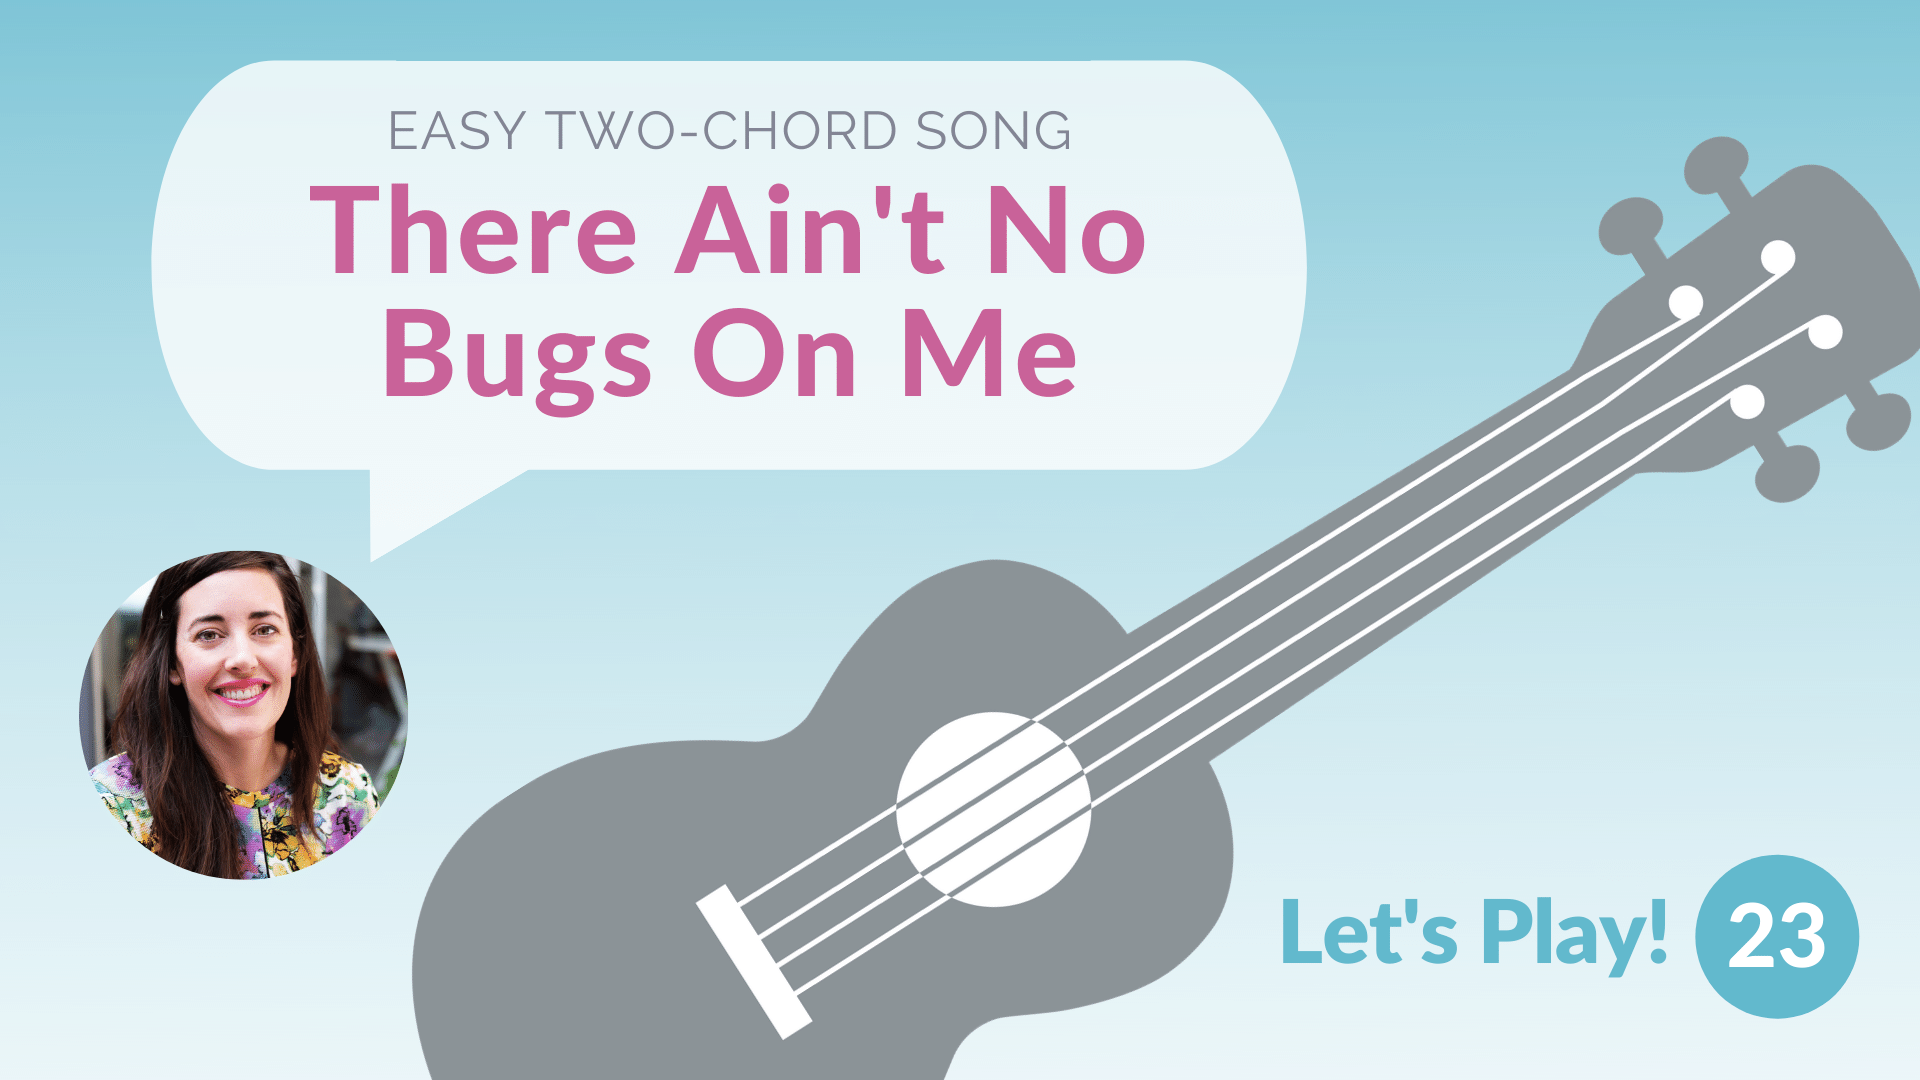 There Ain't No Bugs on Me with the Off-Beat Strum